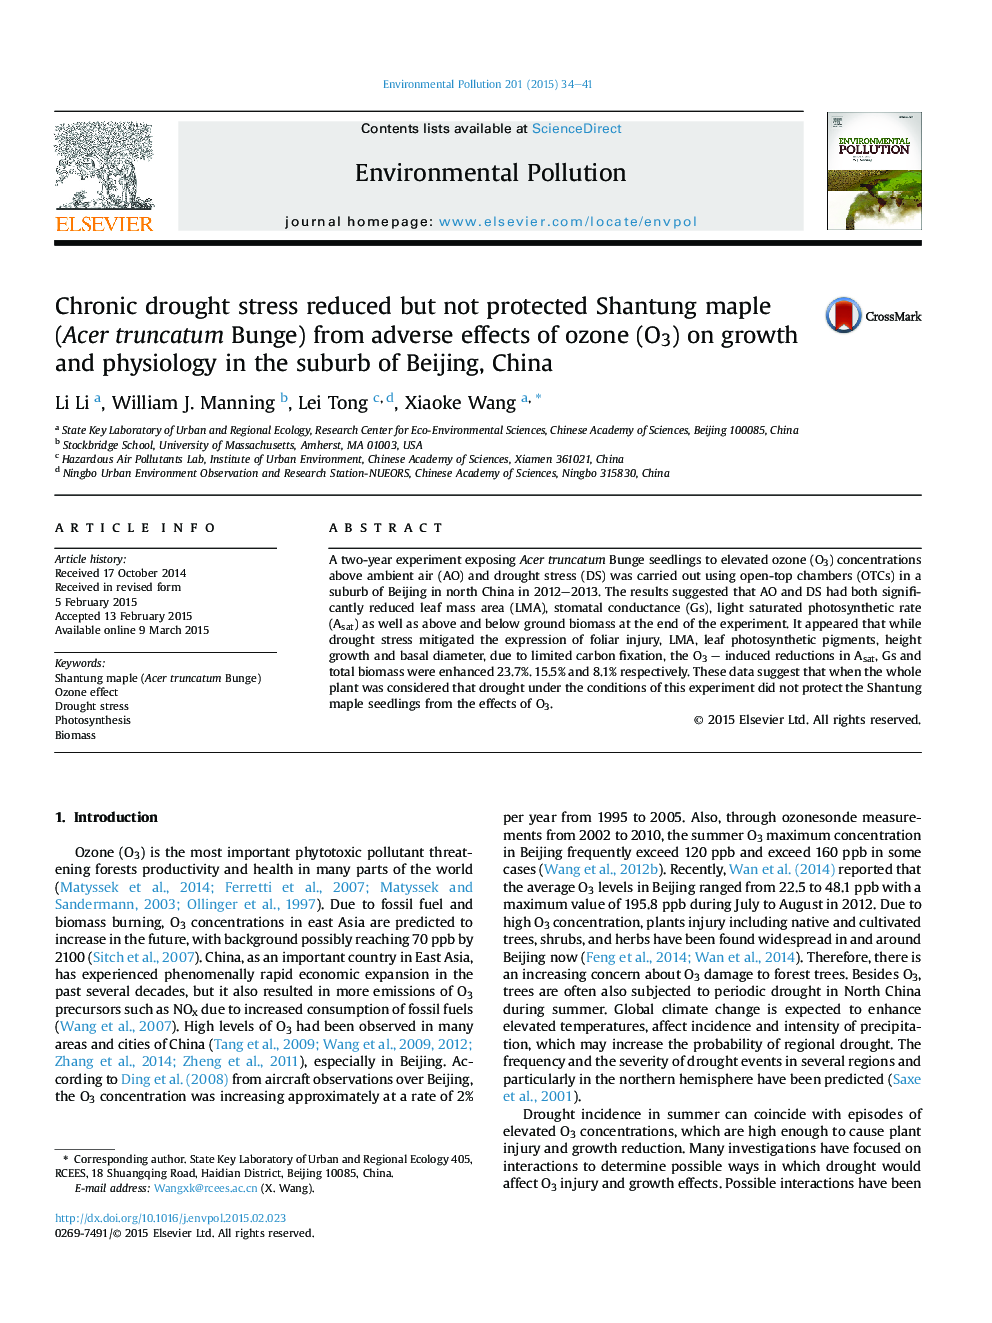 Chronic drought stress reduced but not protected Shantung maple (Acer truncatum Bunge) from adverse effects of ozone (O3) on growth and physiology in the suburb of Beijing, China